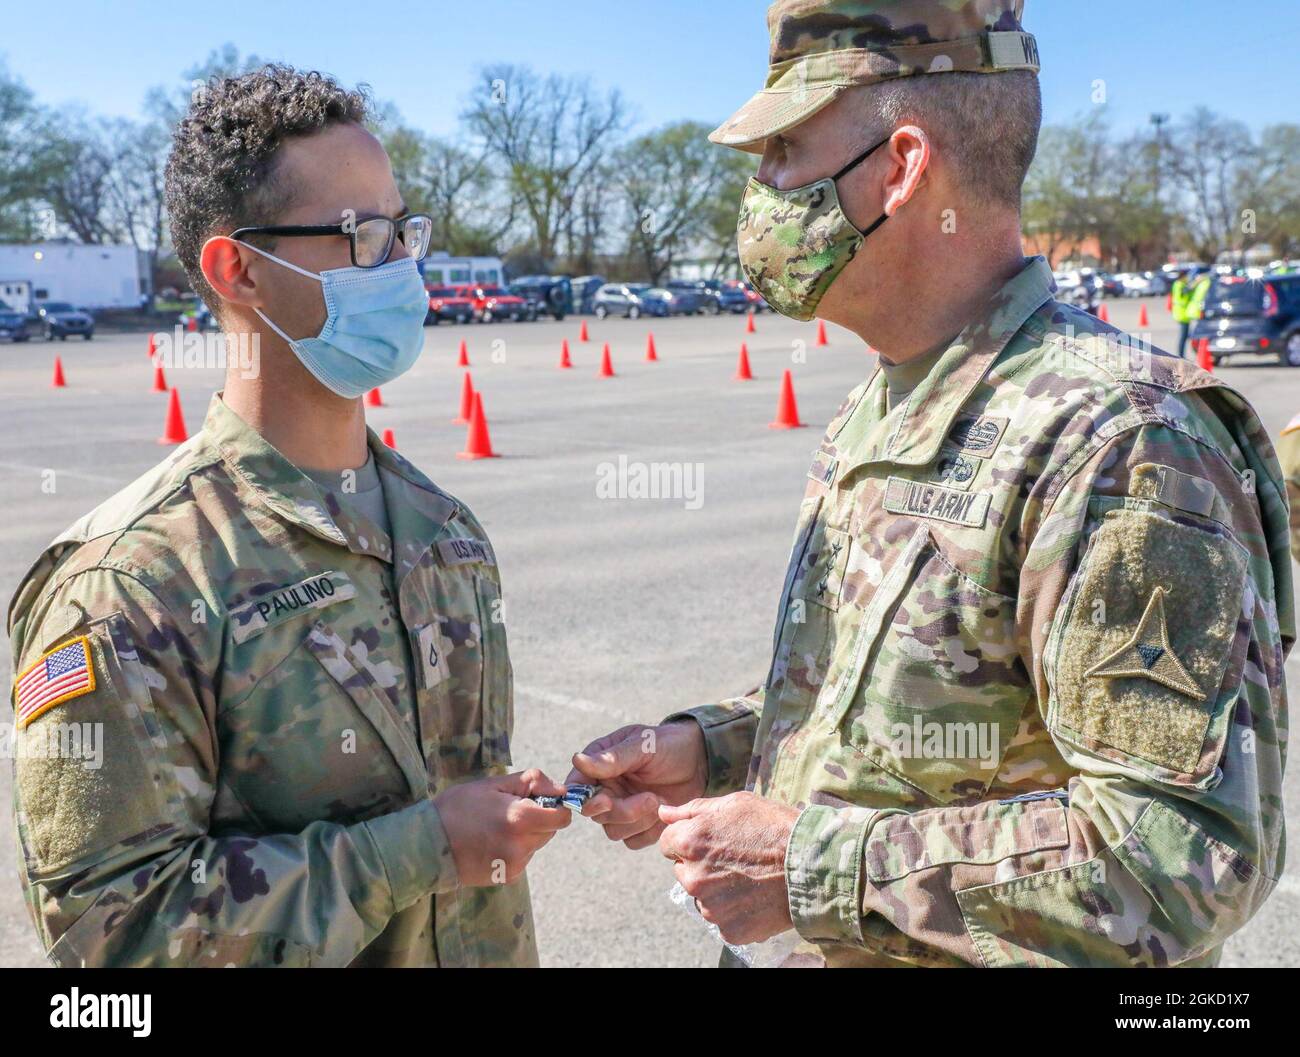 U.S. Army Pfc. Wascar Paulino, a combat medic with 1st Battalion, 7th Field Artillery Regiment, 2nd Armored Brigade Combat Team, 1st Infantry Division, receives a military coin from U.S. Army Lt. Gen. Robert “Pat” White, III Armored Corps and Fort Hood, Texas, commanding general, at the Fair Park Community Vaccination Center (CVC) in Dallas, March 17, 2021. White thanked Paulino for his work ethic and his role in assisting the Federal Emergency Management Agency (FEMA) in its national vaccination efforts. U.S. Northern Command, through U.S. Army North, remains committed to providing continued, Stock Photo